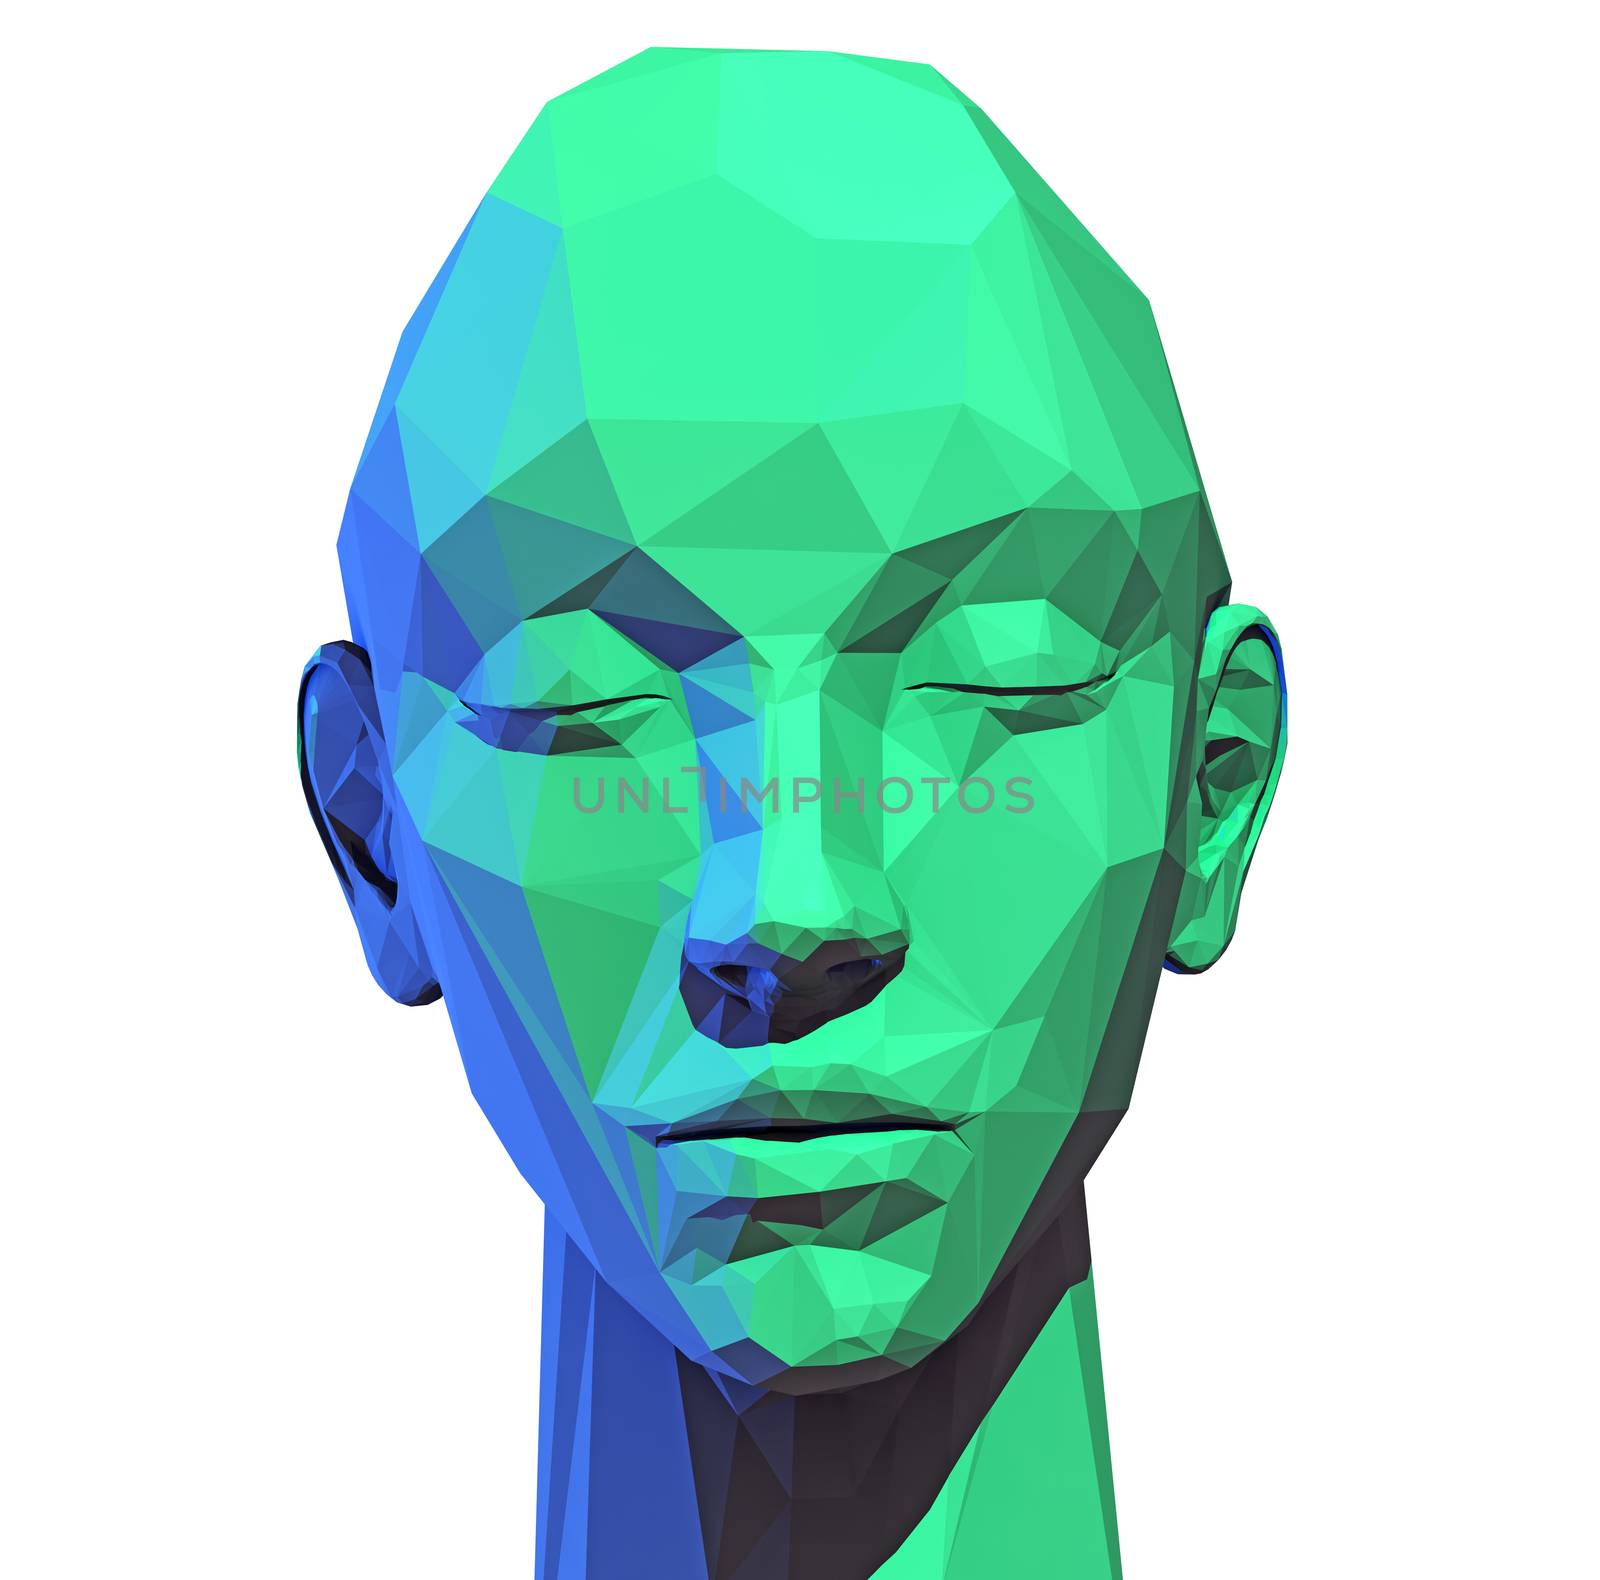 Trendy "low poly" style human head. 3D concept